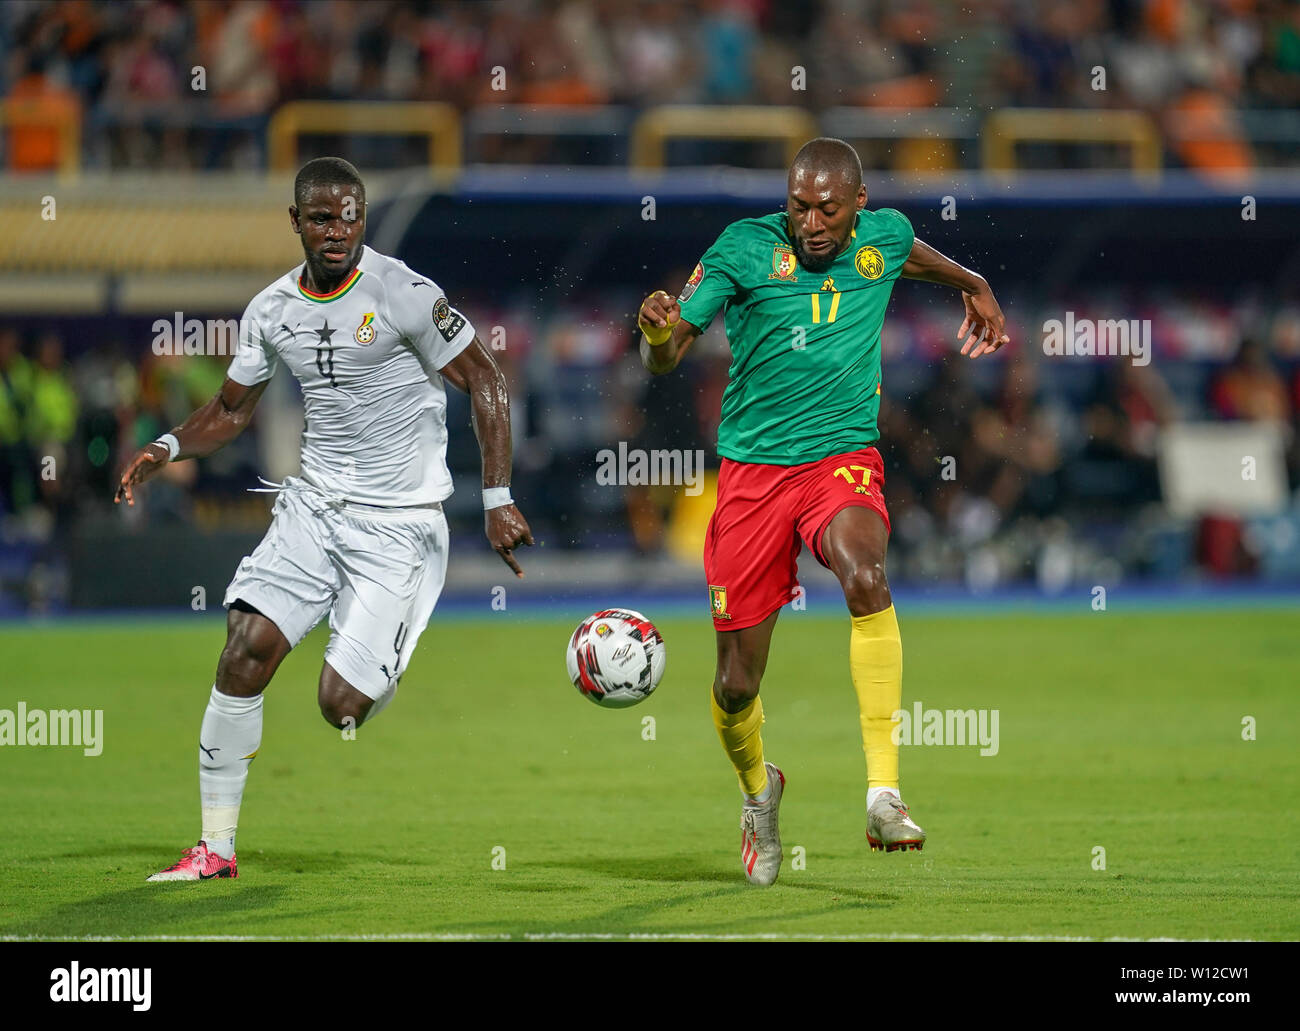 Ismailia, Egypt. 29th June, 2019. Karl Brillant Toko Ekambi of Cameroon and Jonathan Mensah of Ghana challenging for the ball during the 2019 African Cup of Nations match between Cameroon and Ghana at the Ismailia stadium in Ismailia, Egypt. Ulrik Pedersen/CSM/Alamy Live News Stock Photo